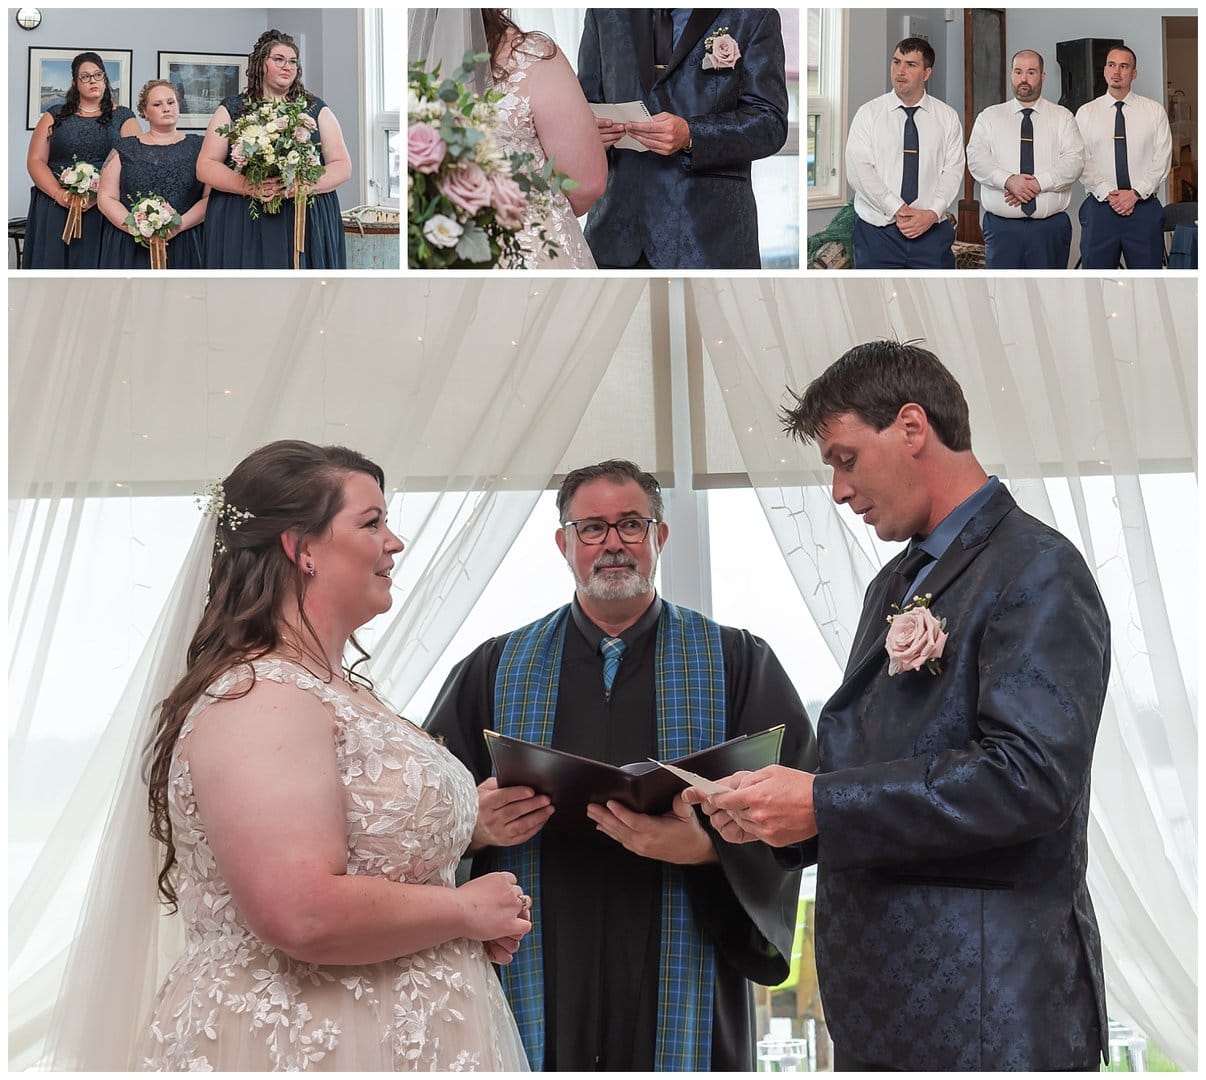 The groom reads his vows to his bride during their wedding ceremony at Fishermans Cove in Eastern Passage NS.